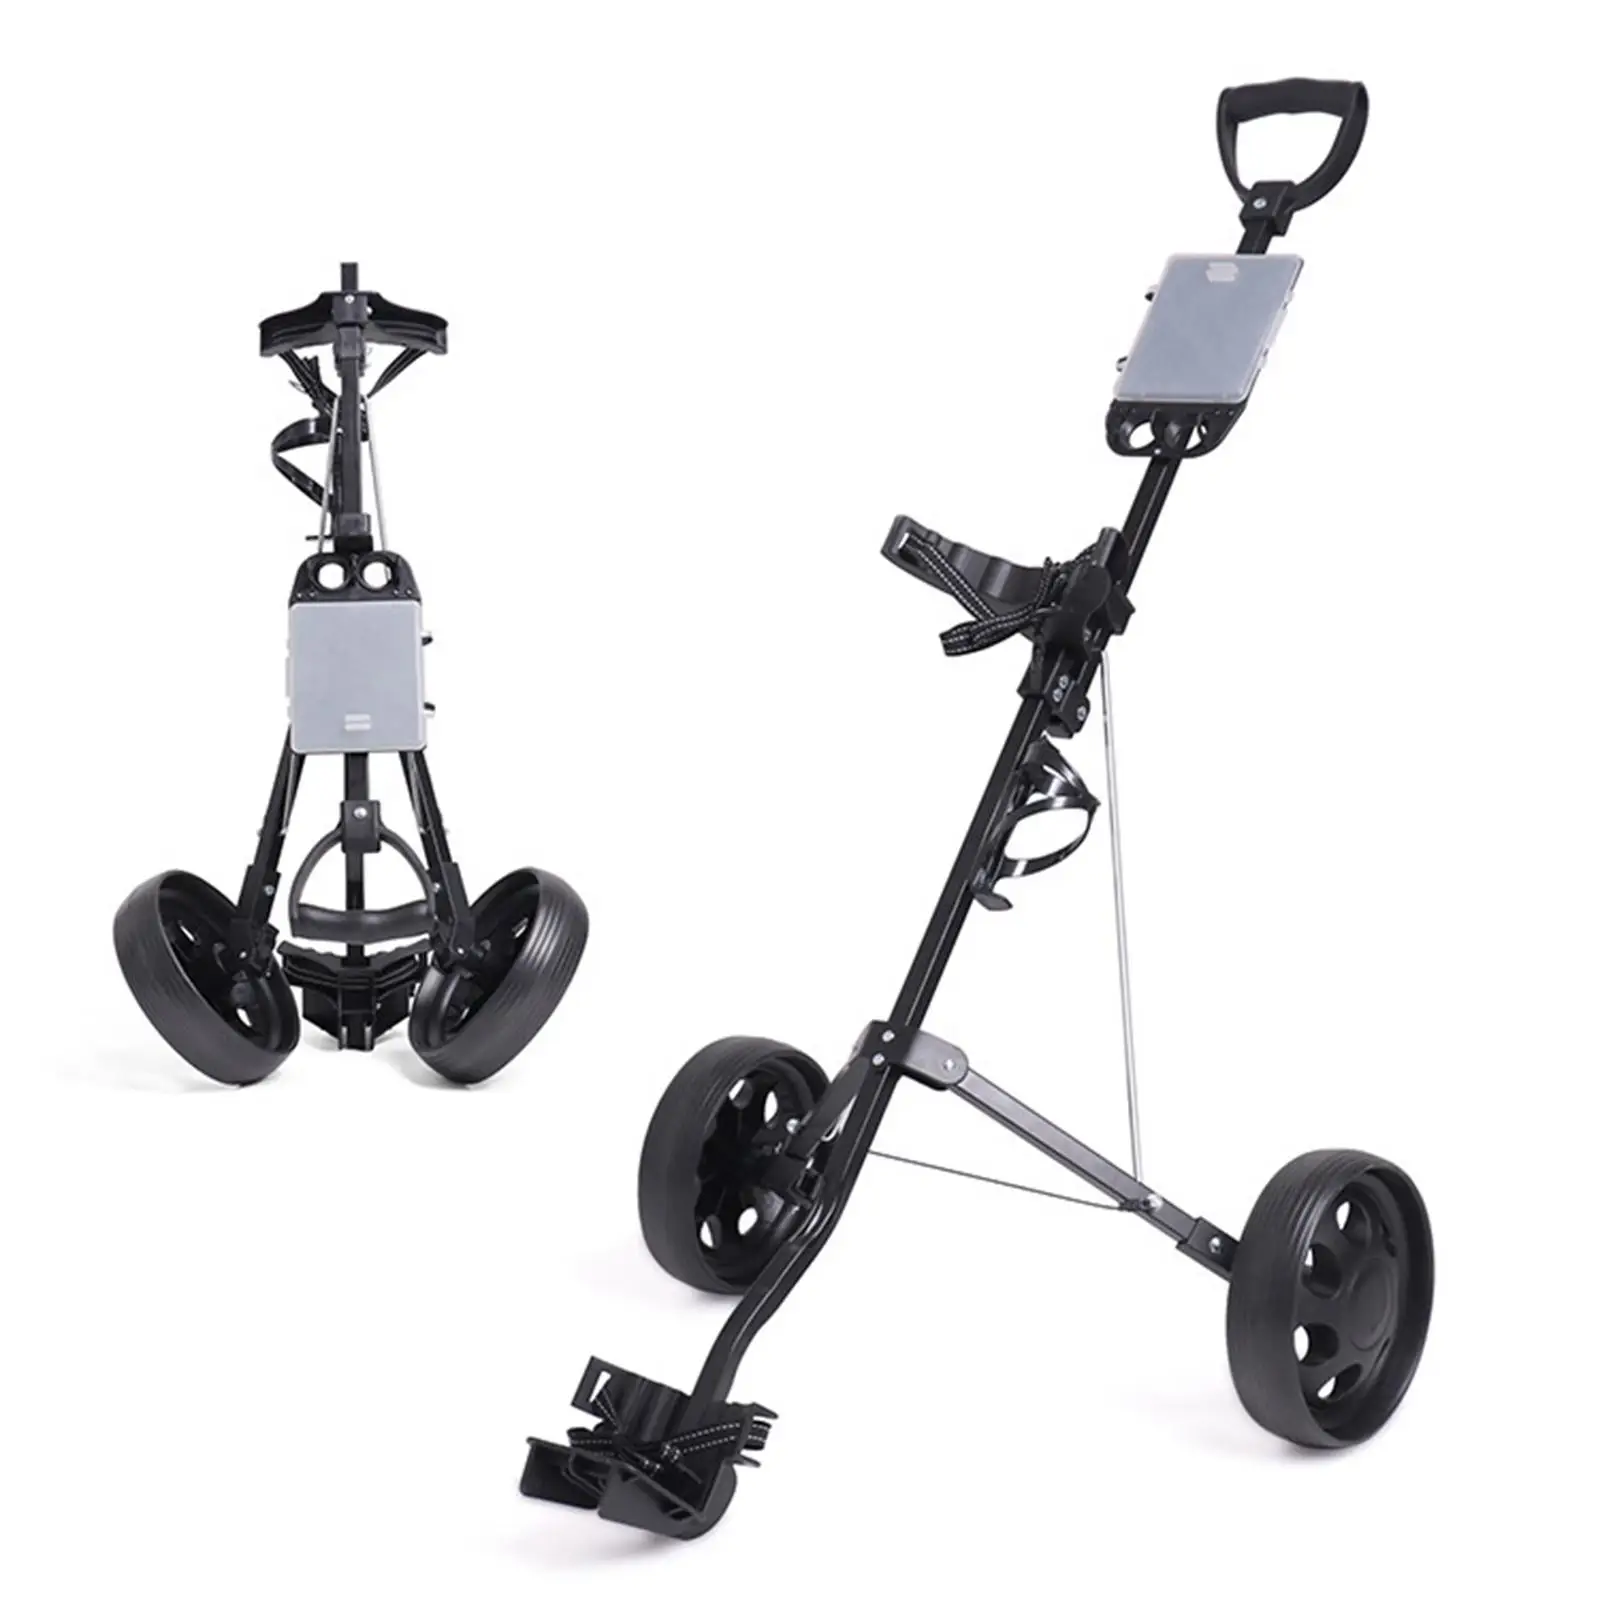 Folding Golf Pull Cart 2 Wheel Easy to Carry Portable Adjustable Handle Angle Lightweight Golf Push Cart for Game Golf Men Kids